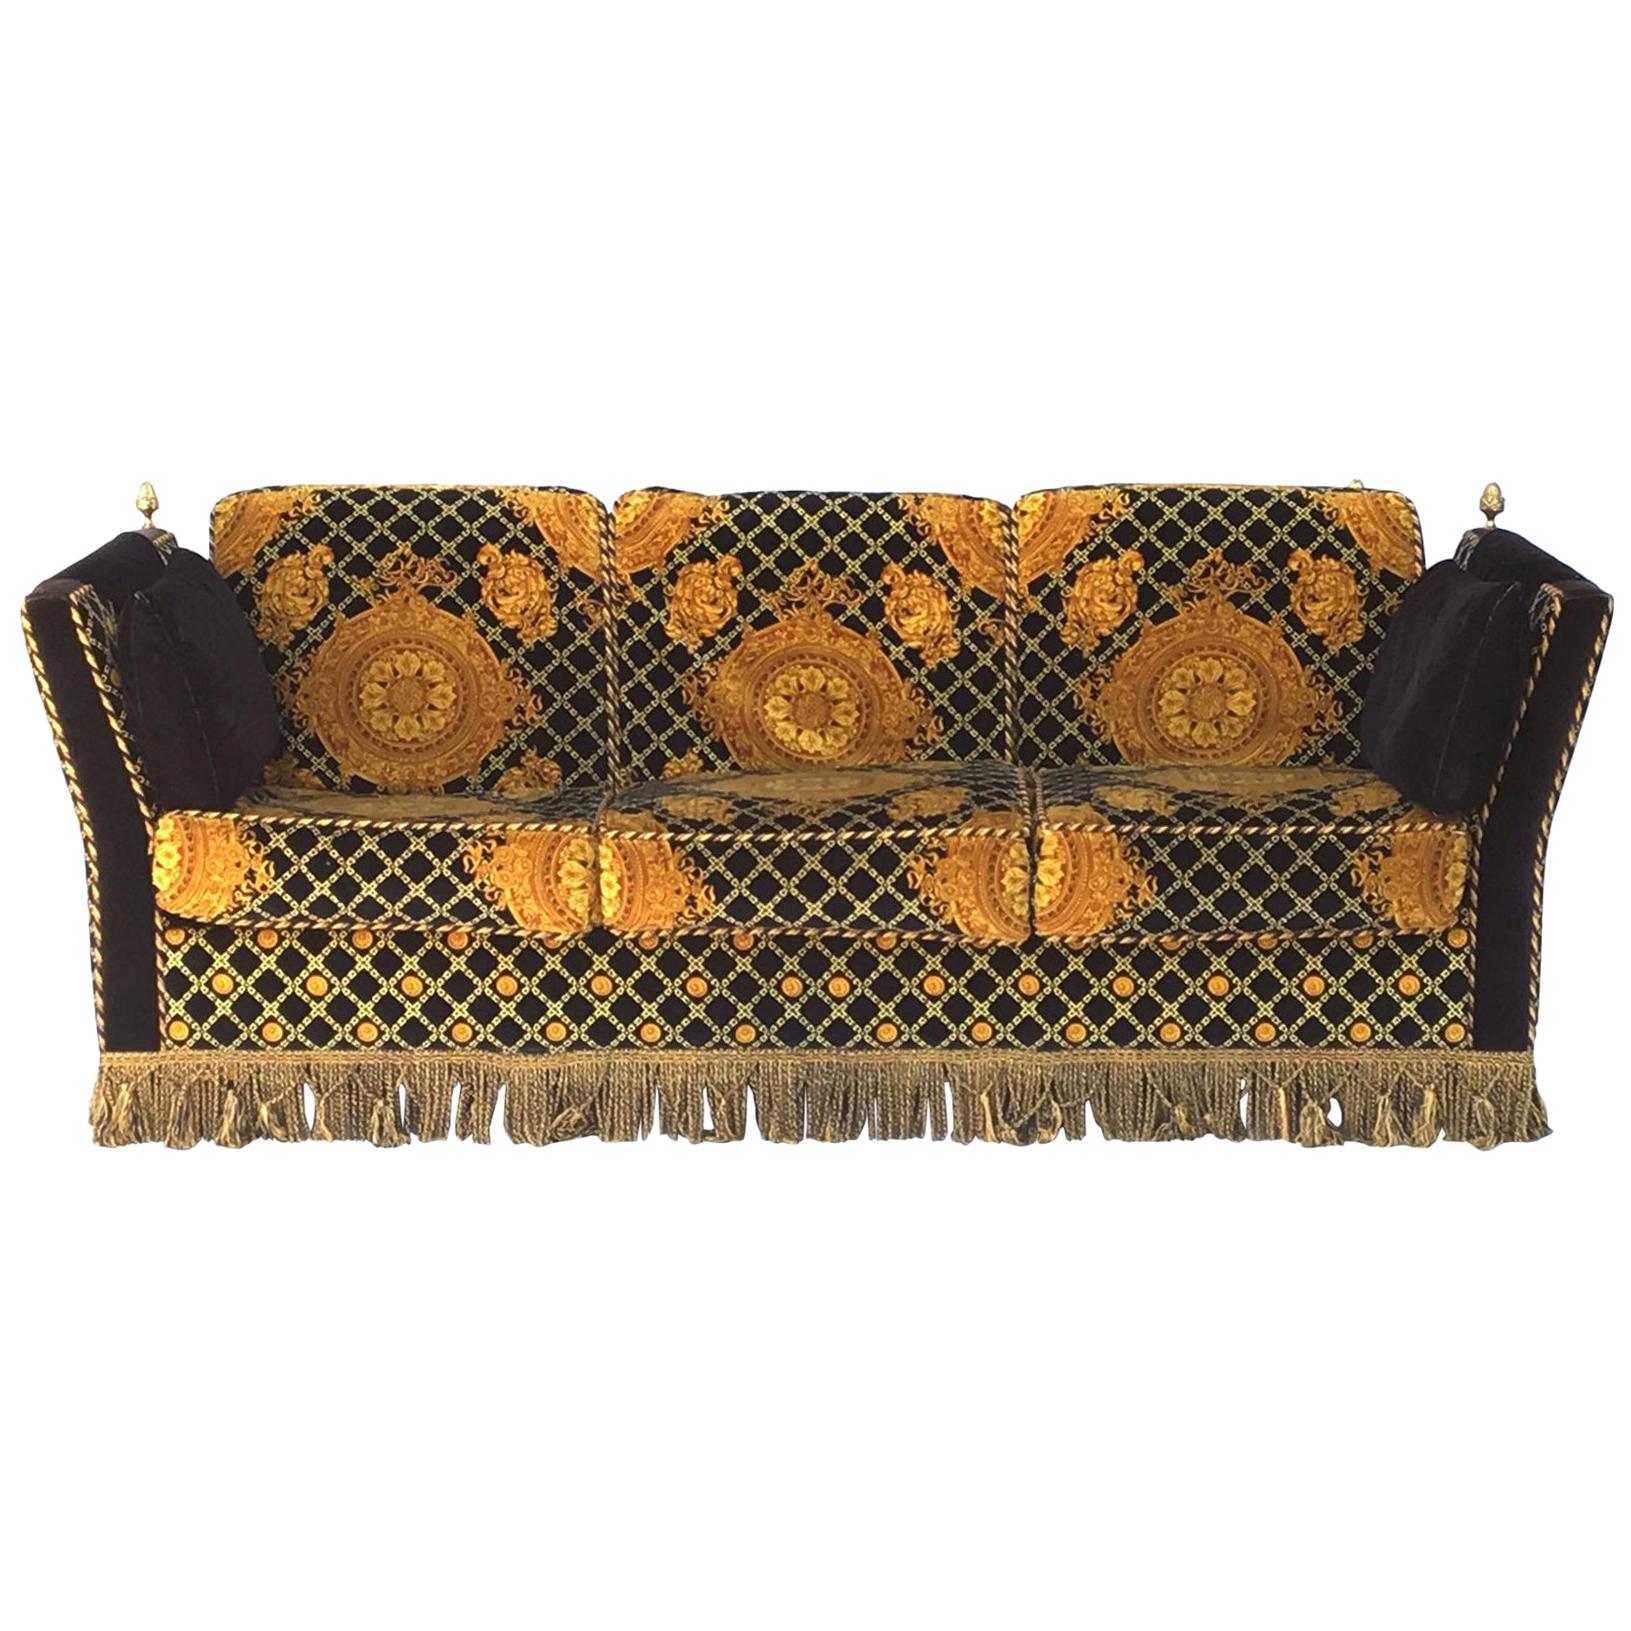 Versace Sofa - For Sale on 1stDibs | versace couch, vintage versace  furniture, gianni versace 1990